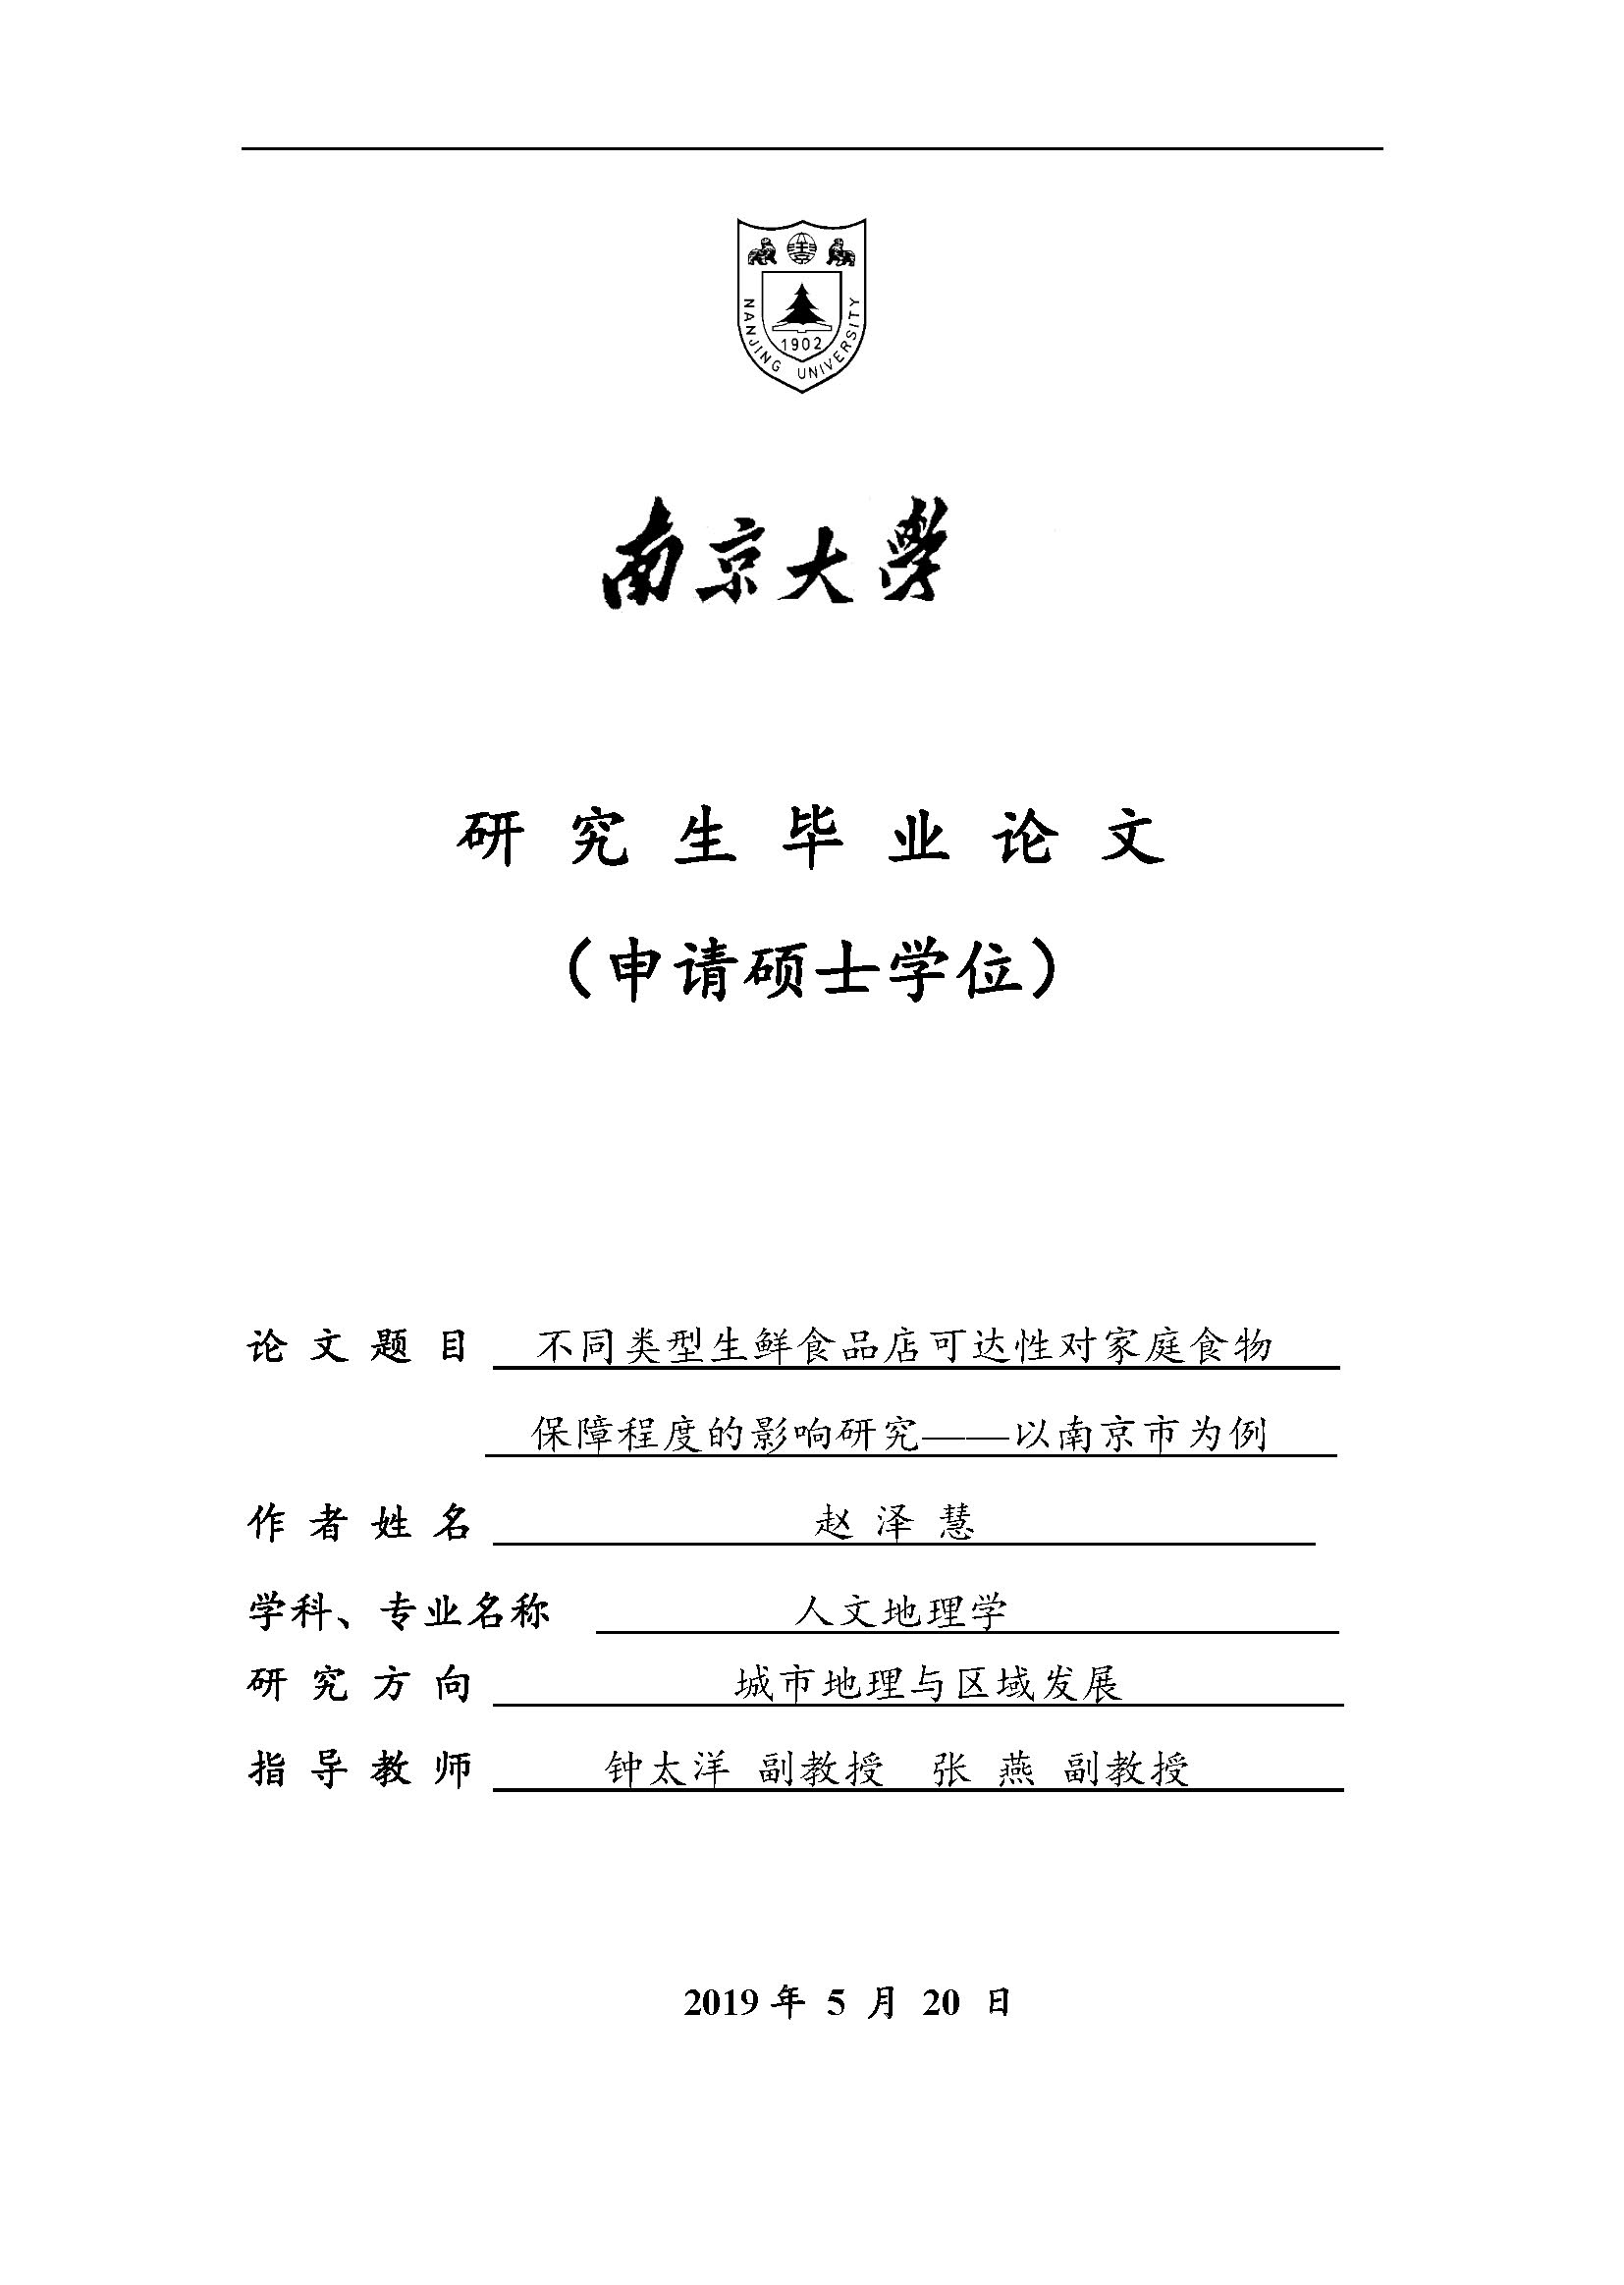 Zehui-Zhao-thesis-2019 Cover